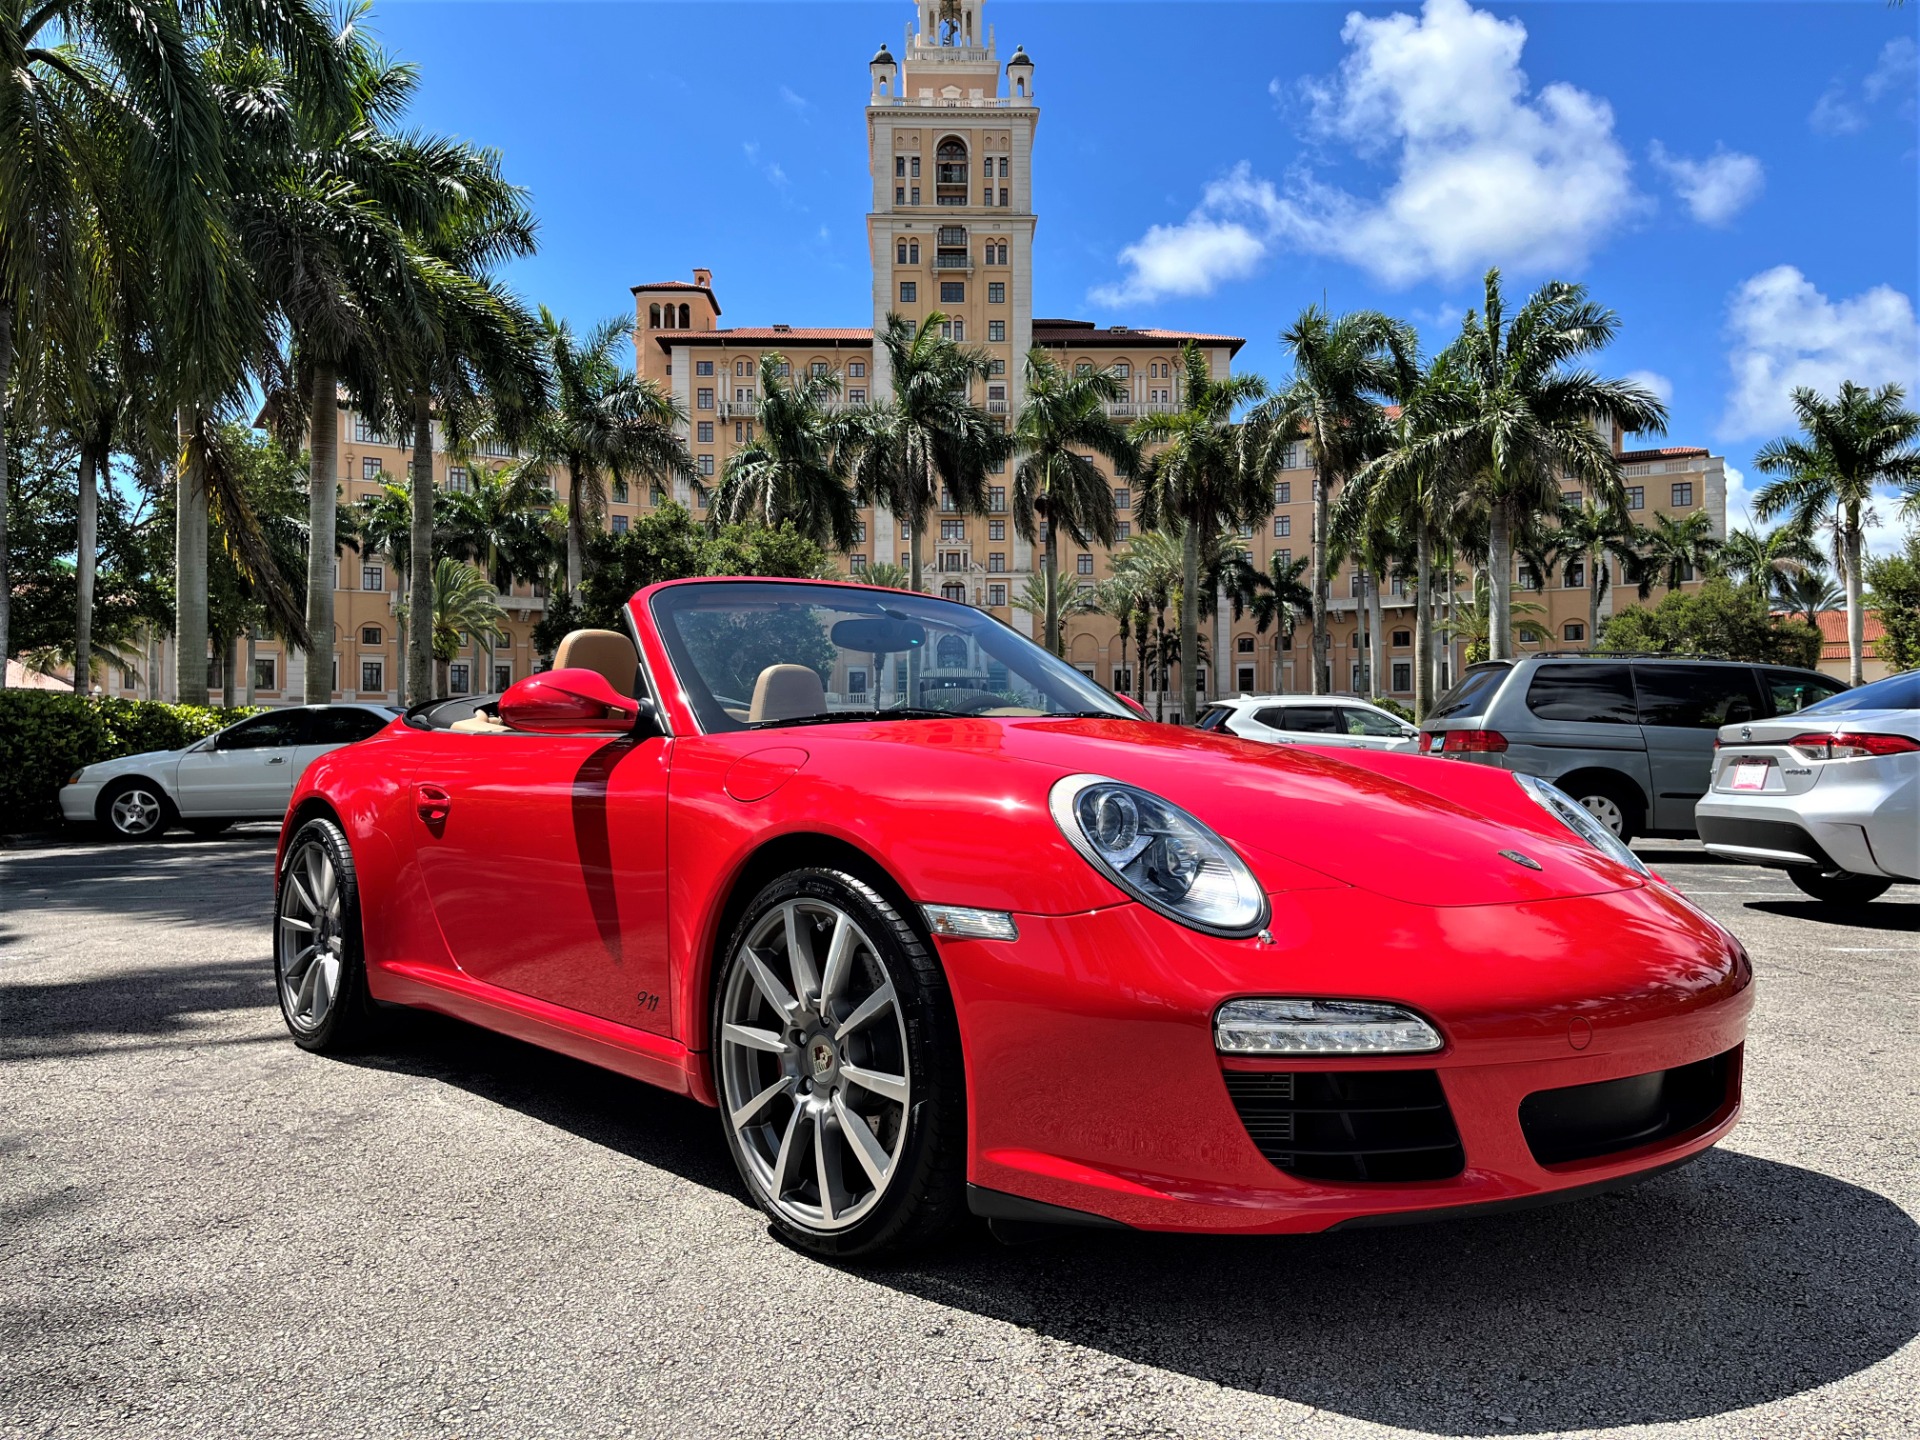 Used 2012 Porsche 911 Carrera for sale Sold at The Gables Sports Cars in Miami FL 33146 1